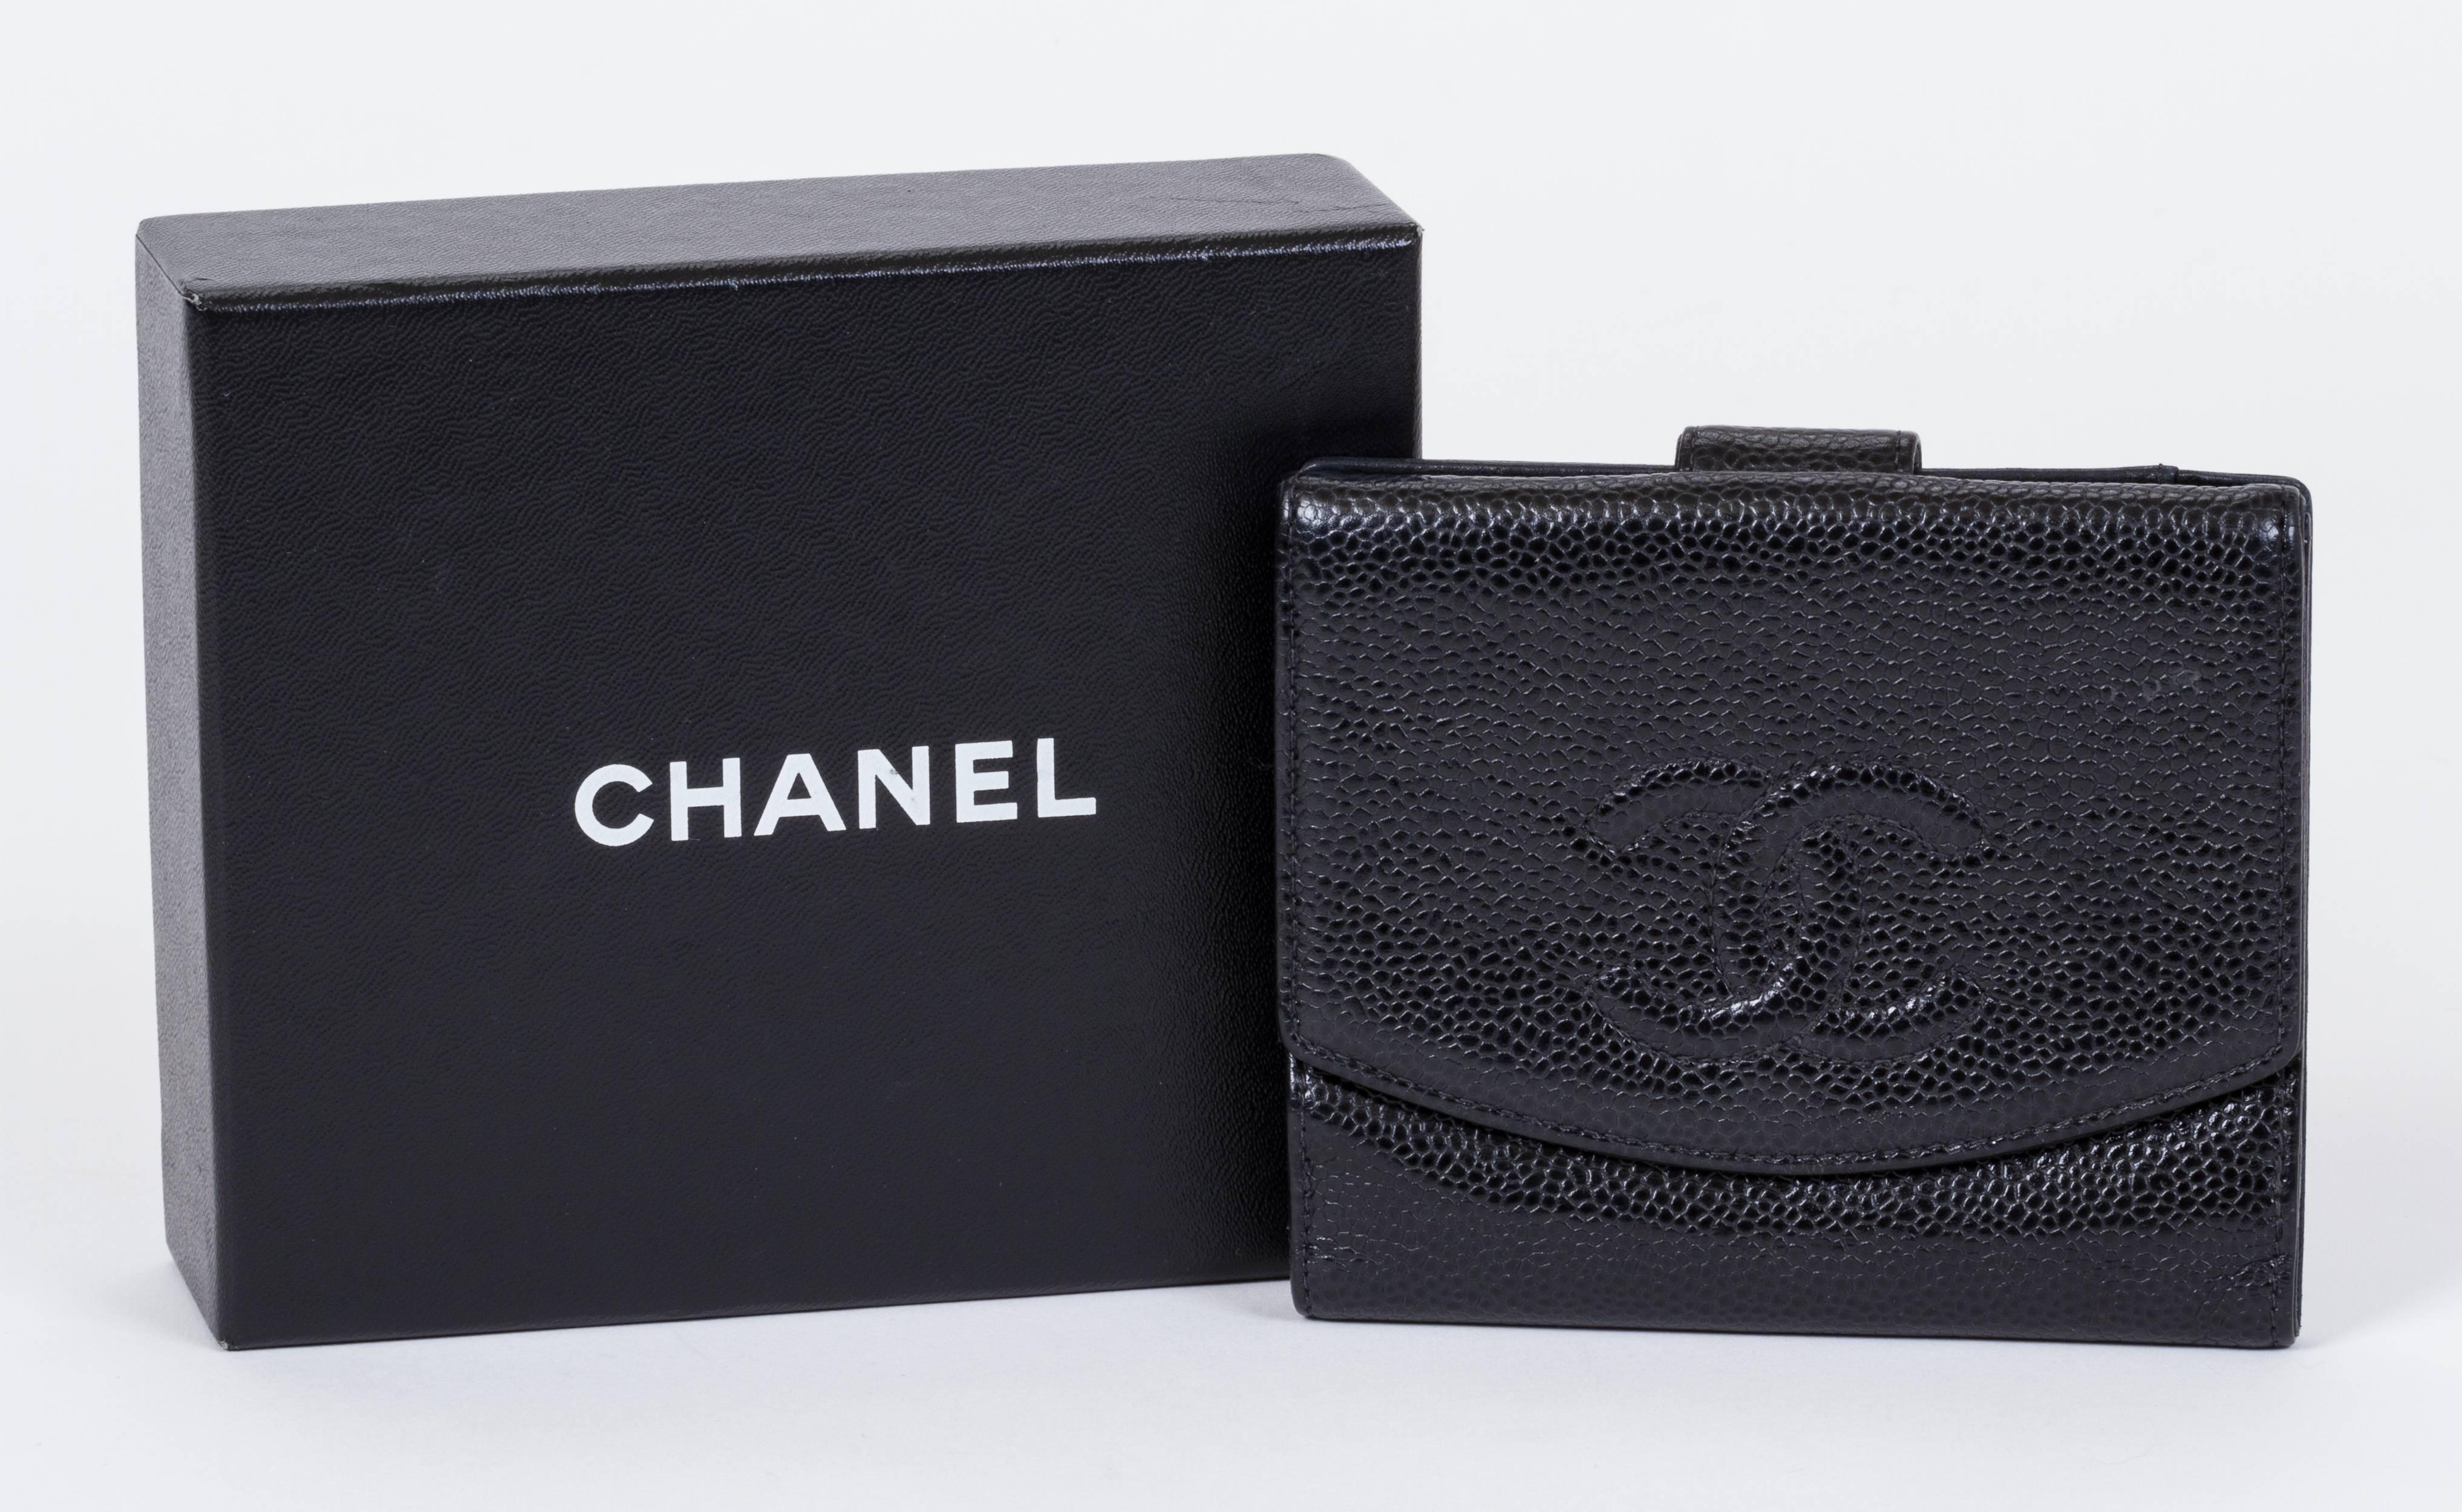 Chanel black caviar bifold wallet. 2000 collection. Comes with hologram and original box.